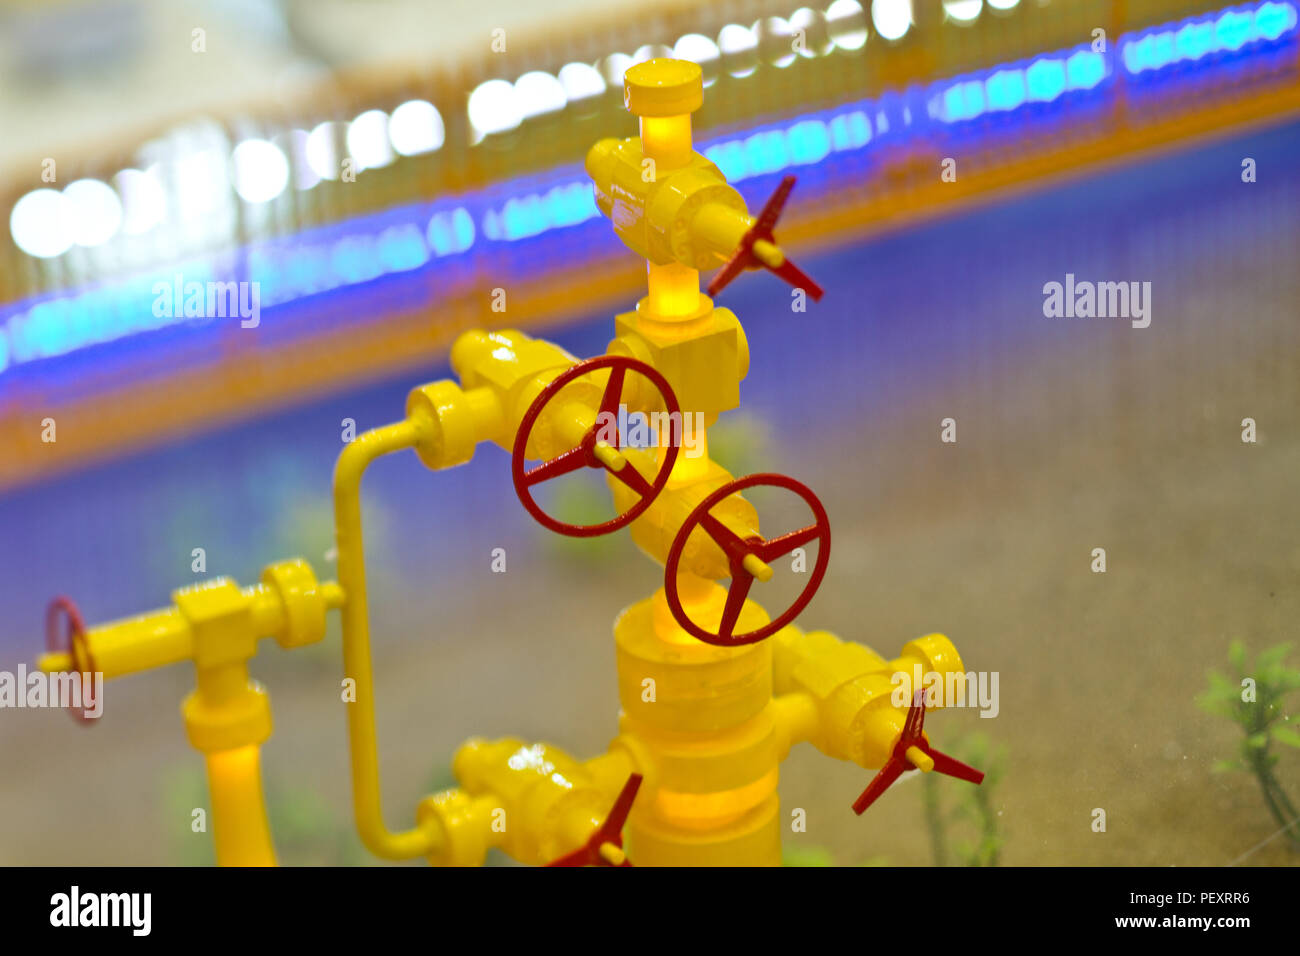 LNG terminal reproduction at reduced size Stock Photo